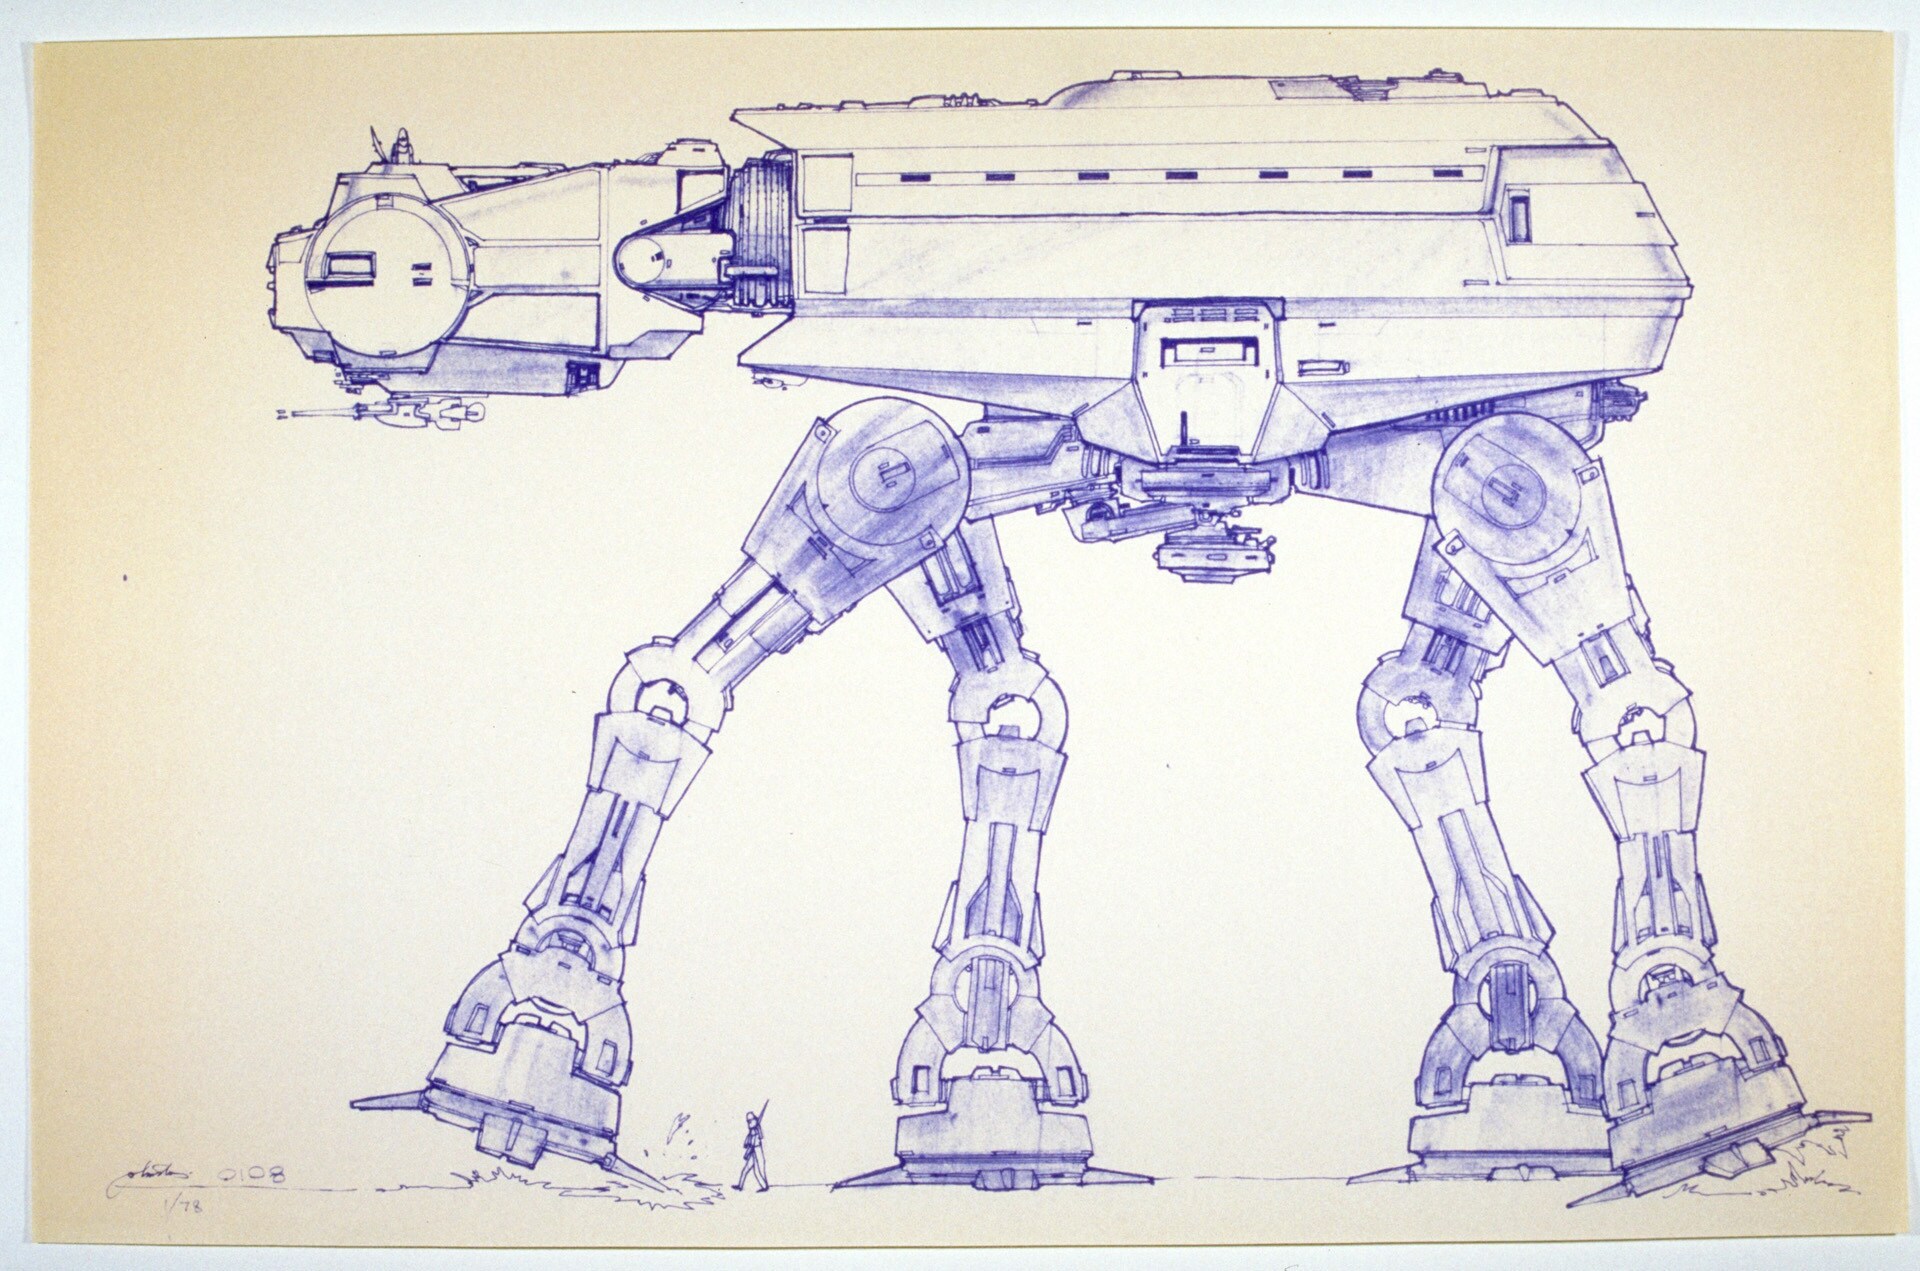 The AT-AT model seen in this episode is far larger than the walkers seen in Episode V, indicating...